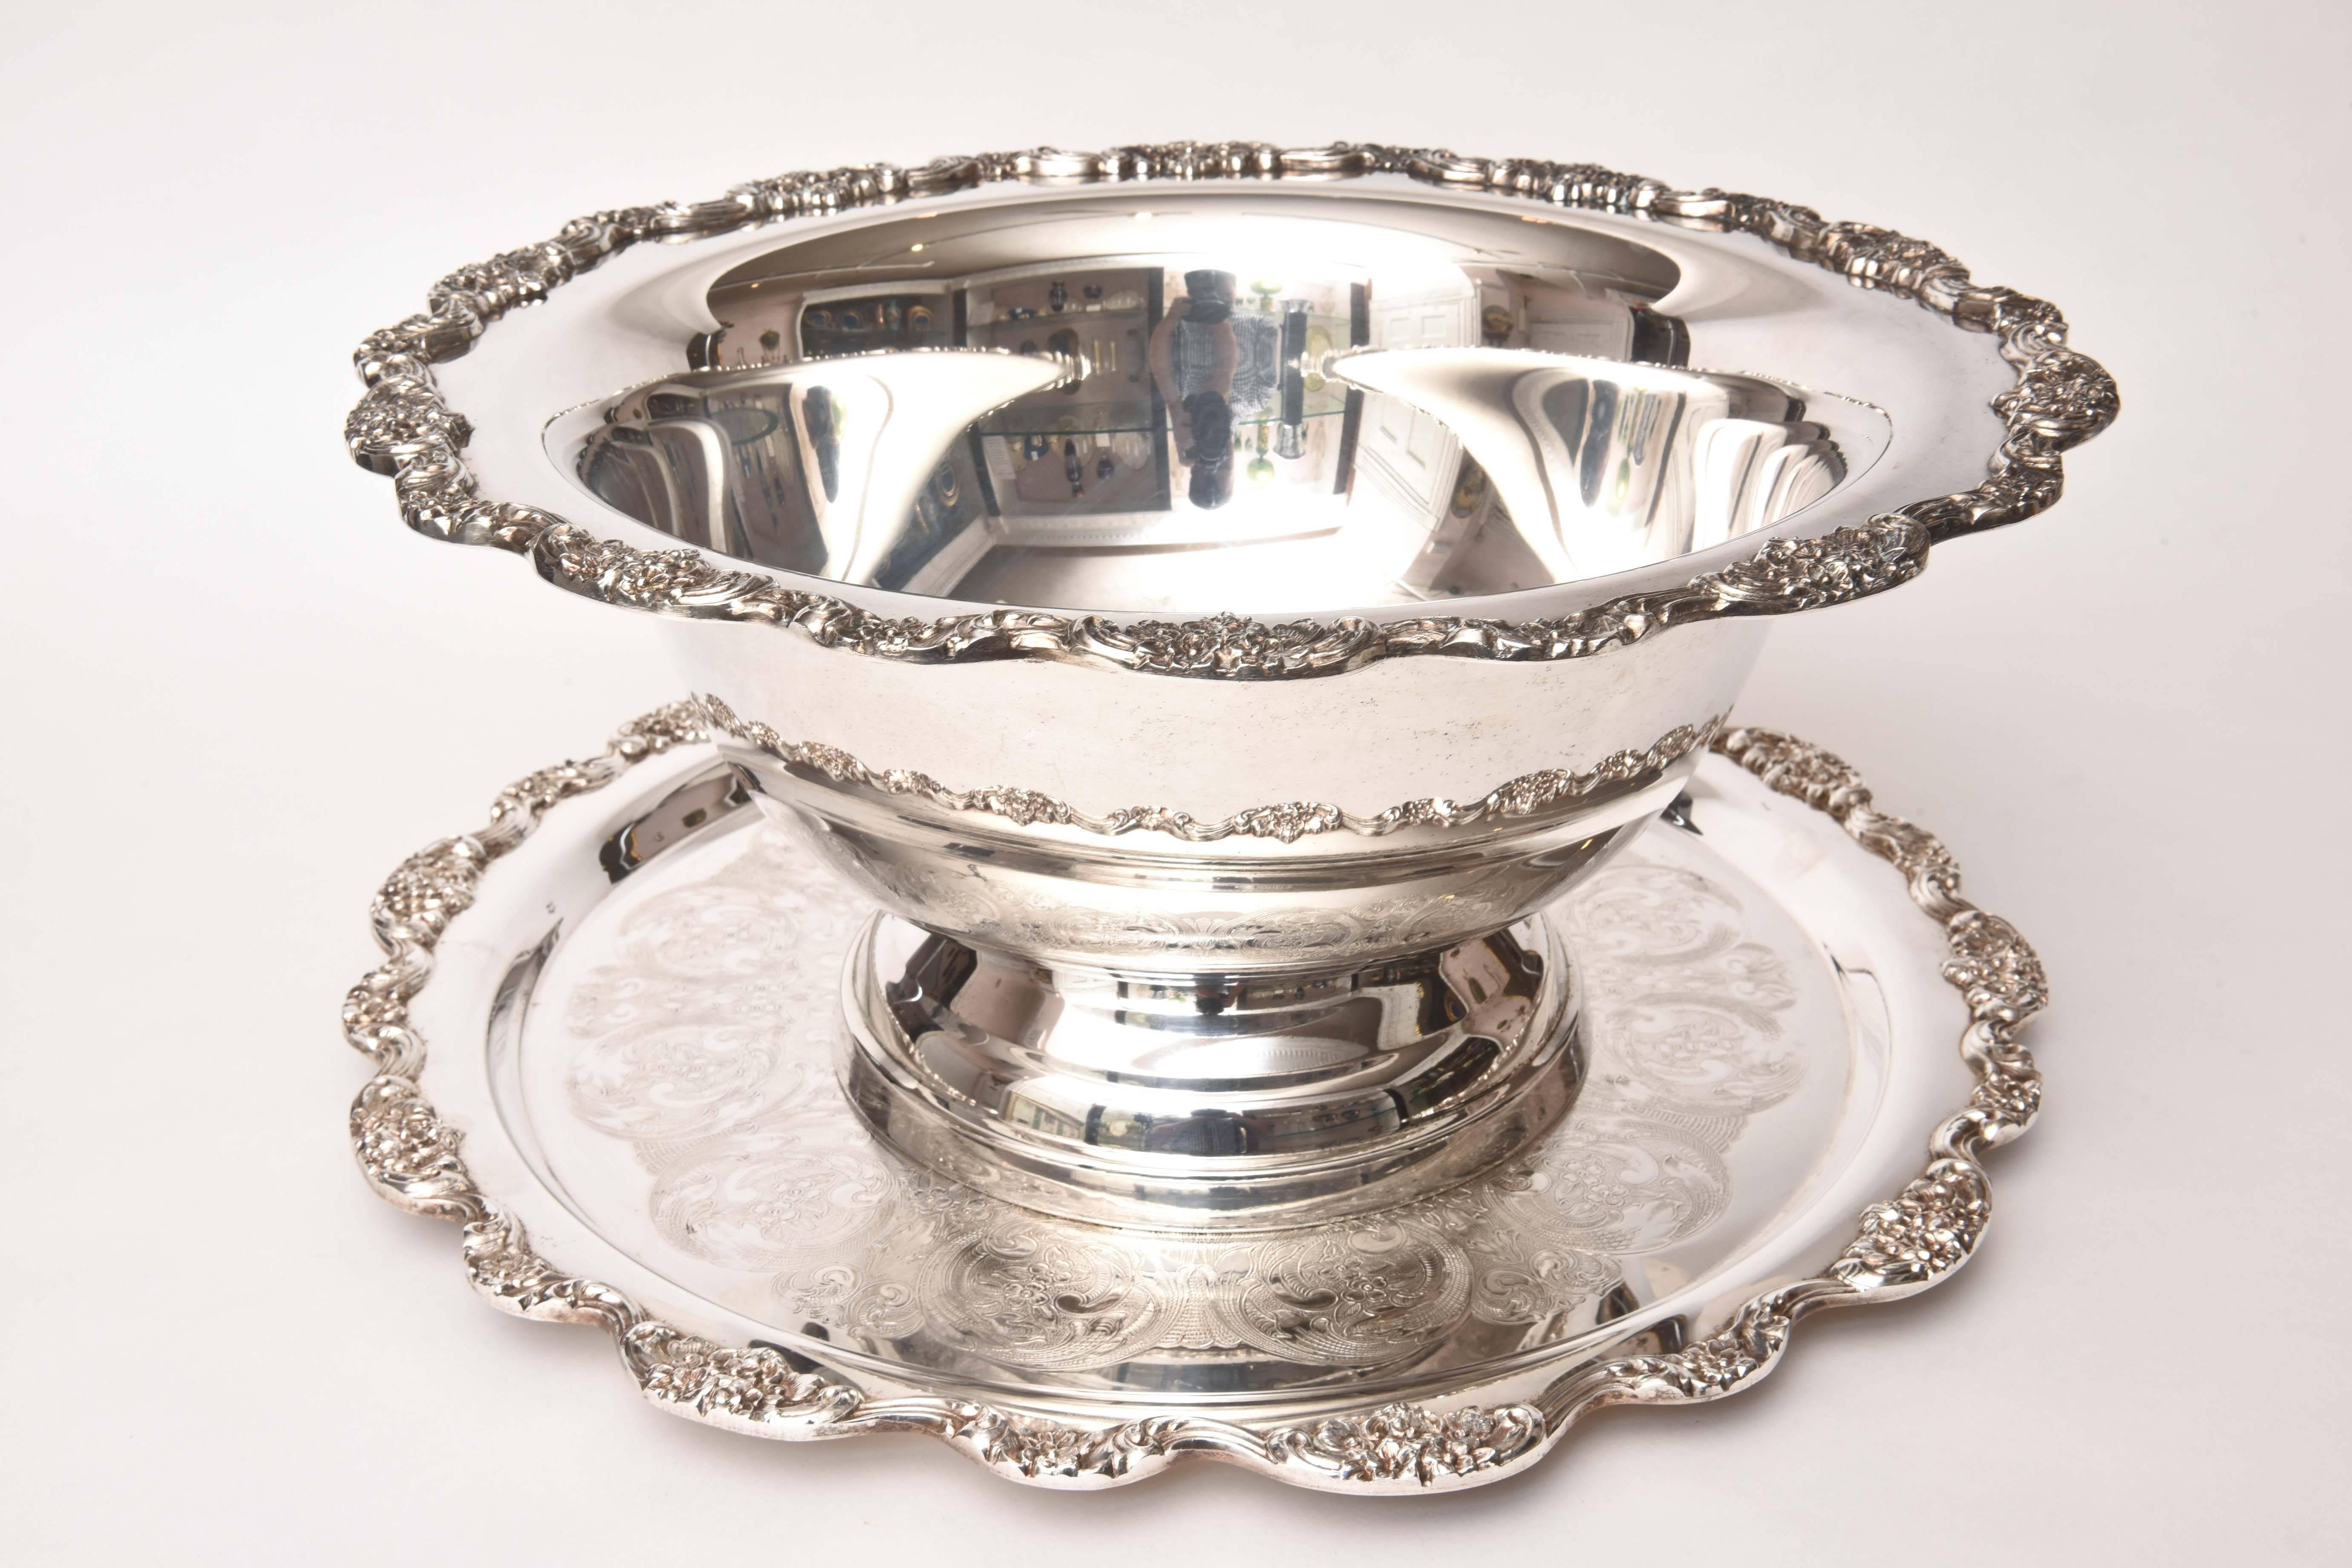 Impressive Silver Plate Punch Bowl and under Tray, American Vintage 4